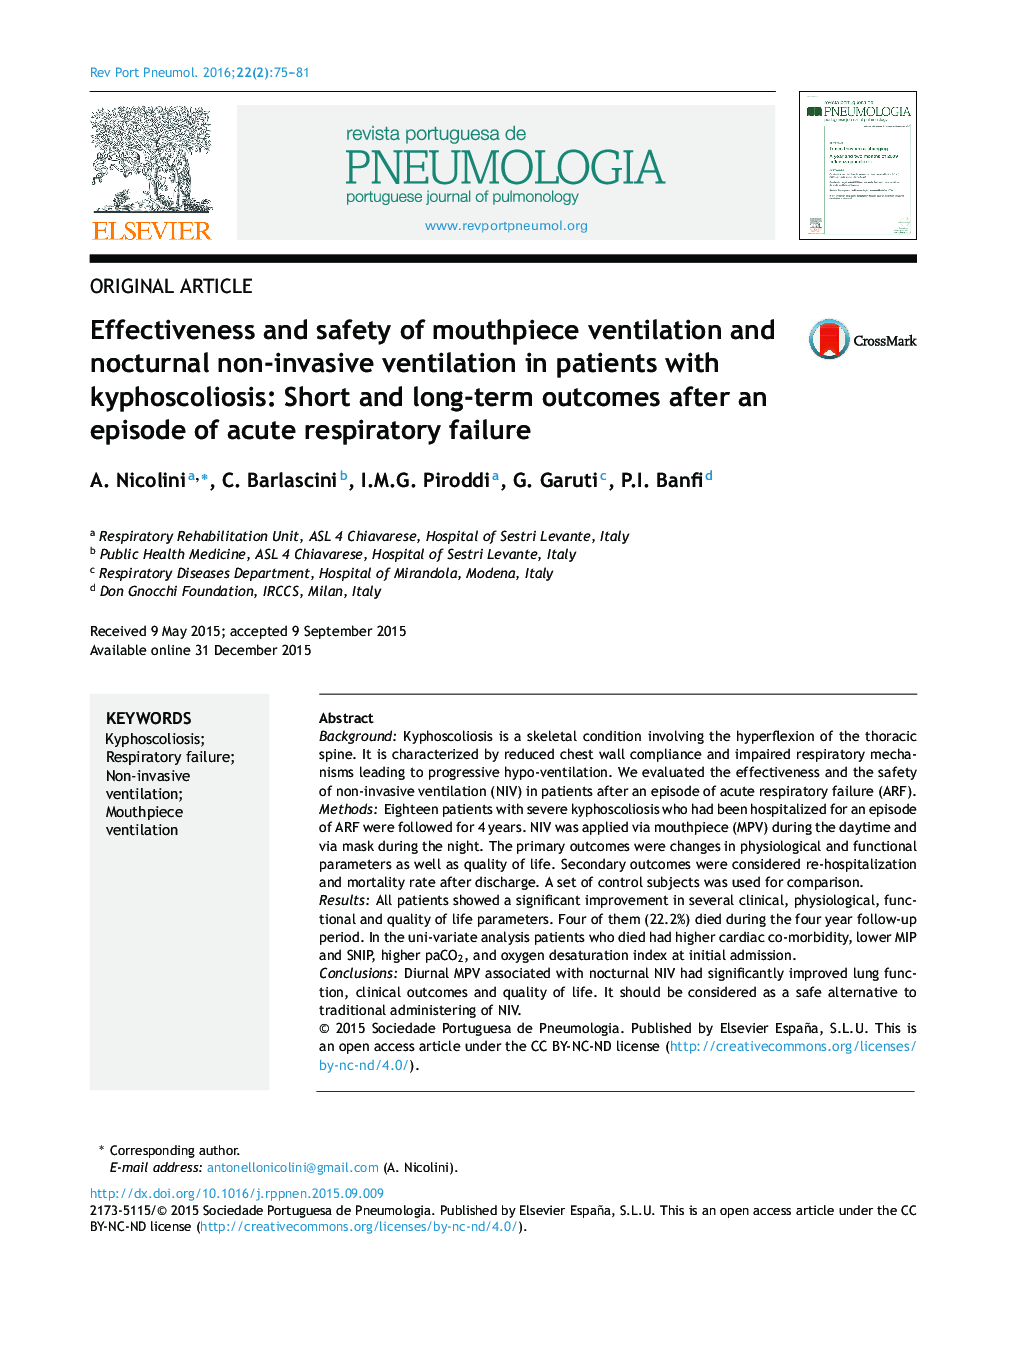 Effectiveness and safety of mouthpiece ventilation and nocturnal non-invasive ventilation in patients with kyphoscoliosis: Short and long-term outcomes after an episode of acute respiratory failure